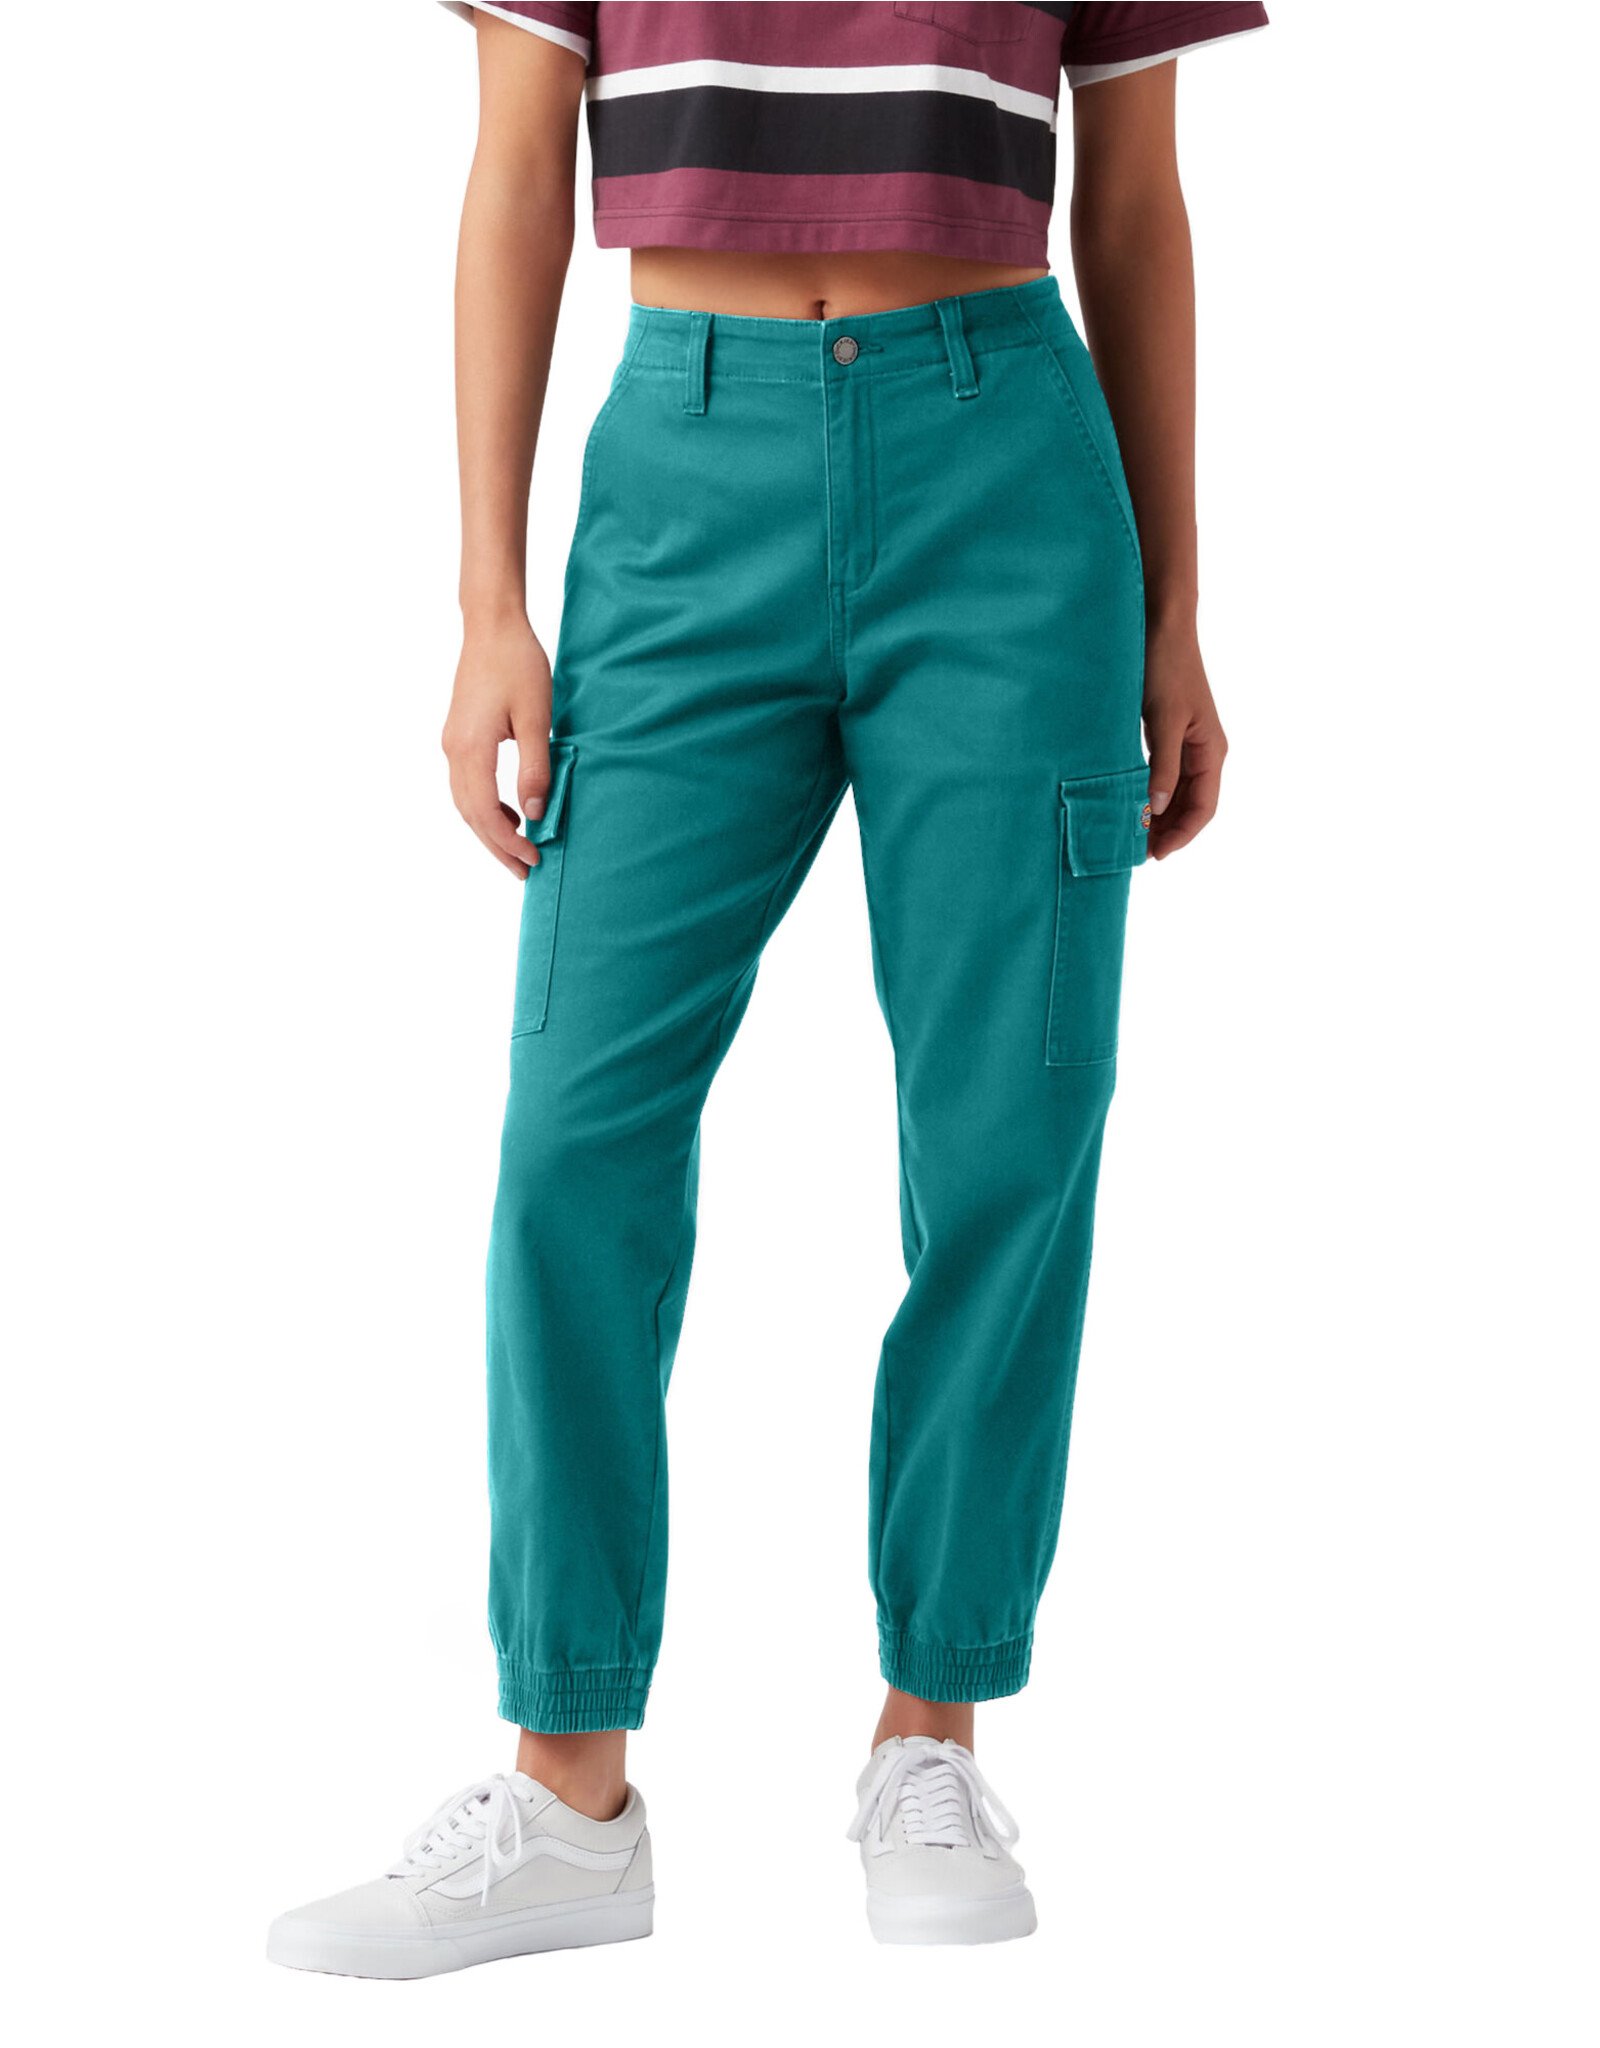 DICKIES Women's High Rise Fit Cargo Jogger Pants Deep Lake - FPR54DL2 -  Boutique X20 MTL